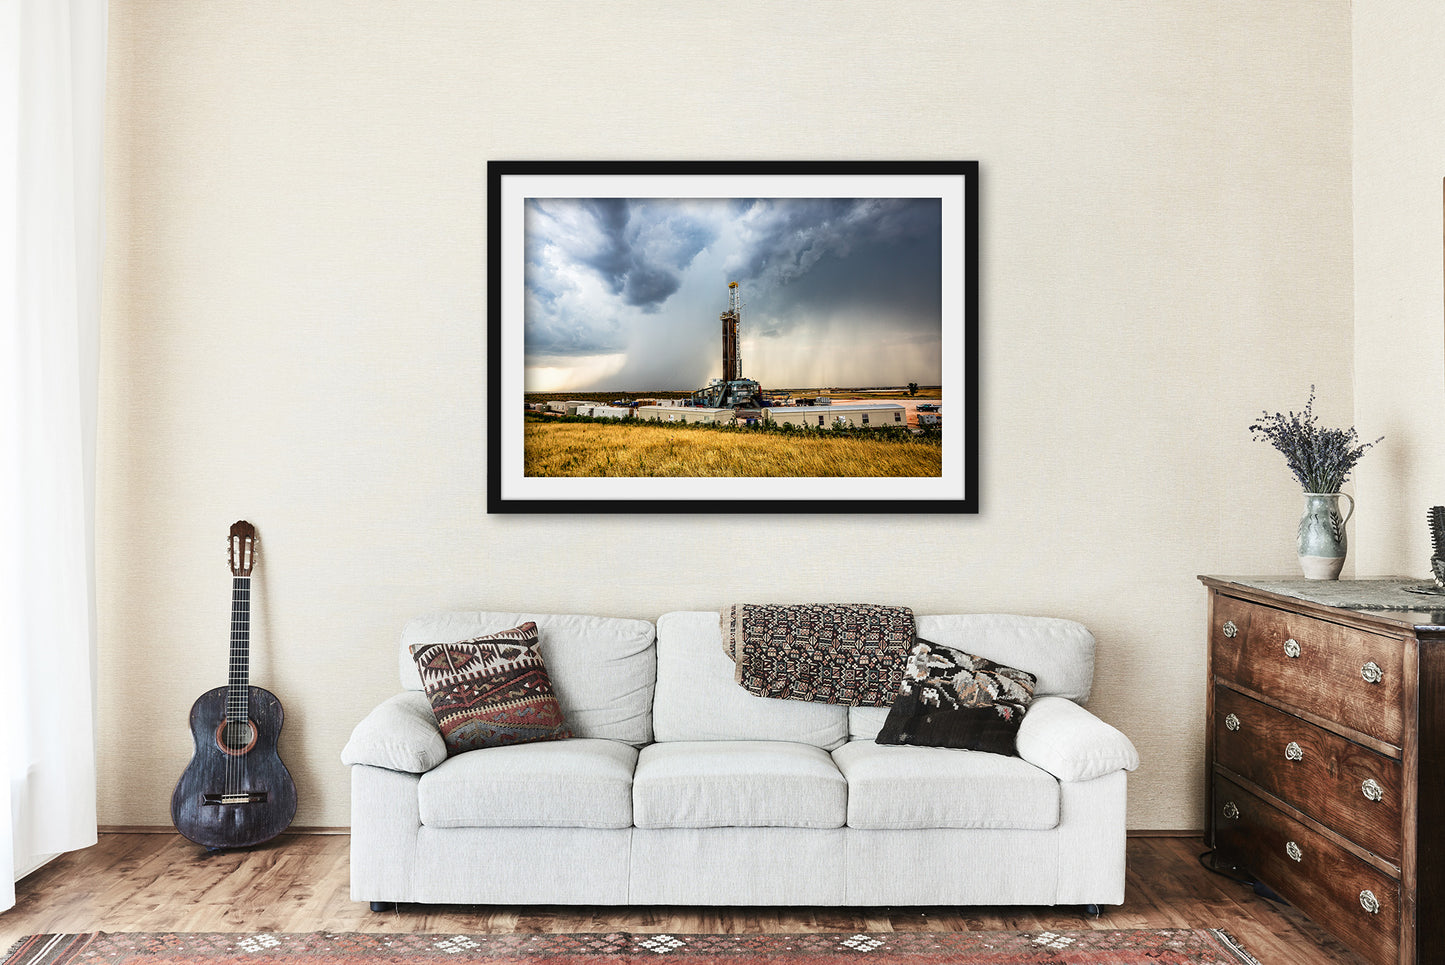 Storm Passing Behind Drilling Rig Framed Print | Oilfield Wall Art | Thunderstorm Picture | Oklahoma Photo | Oil and Gas Decor